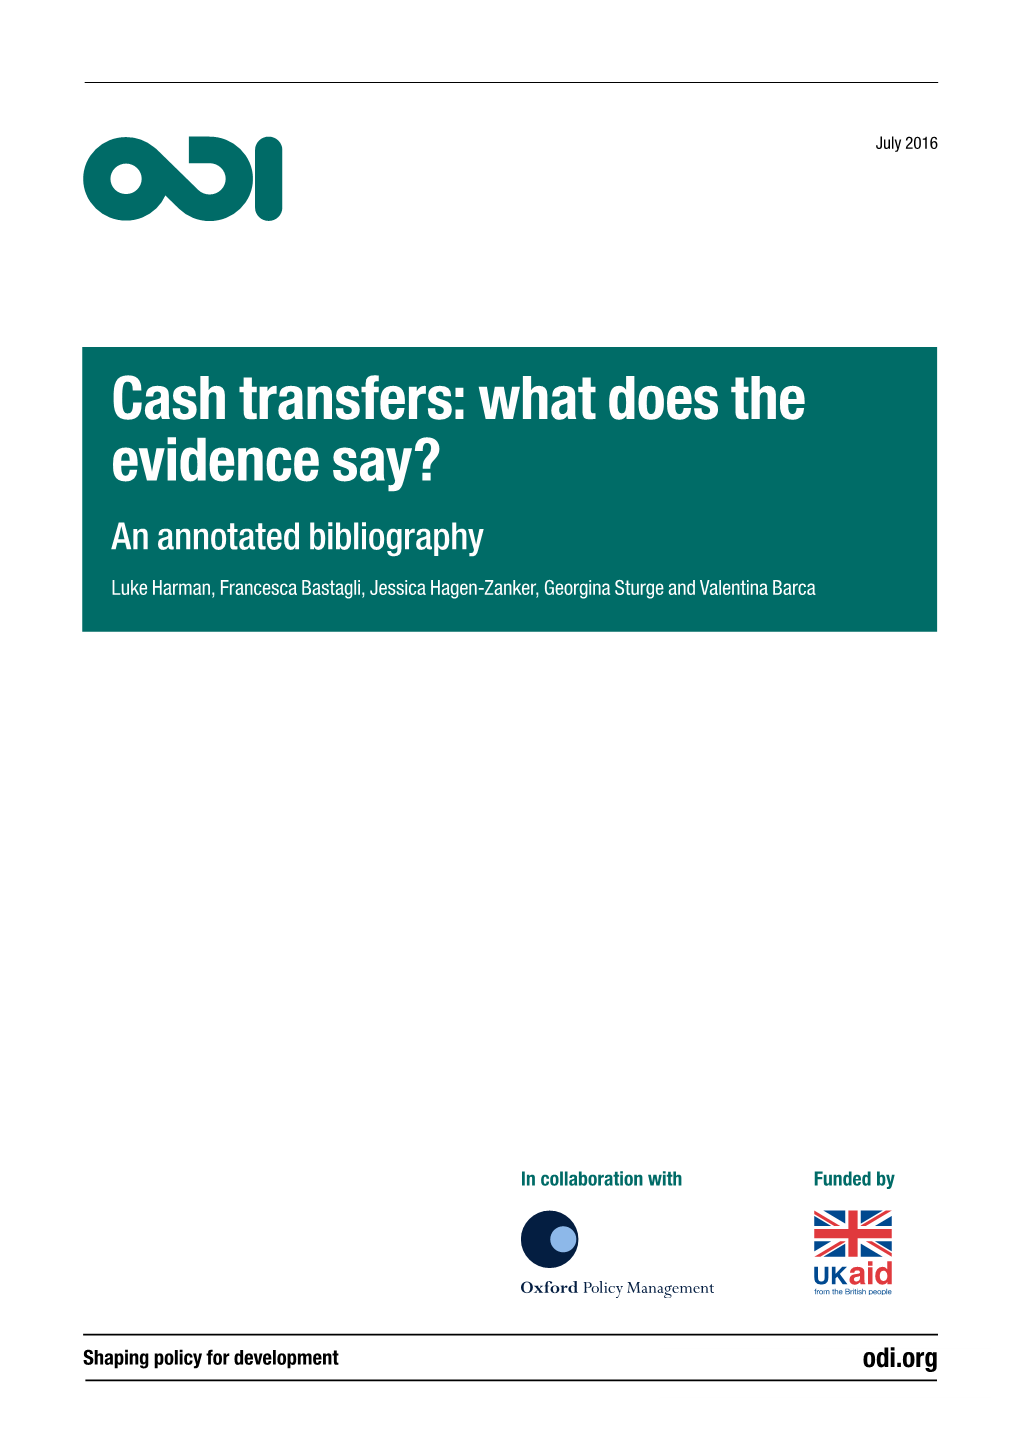 Cash Transfers: What Does the Evidence Say? an Annotated Bibliography